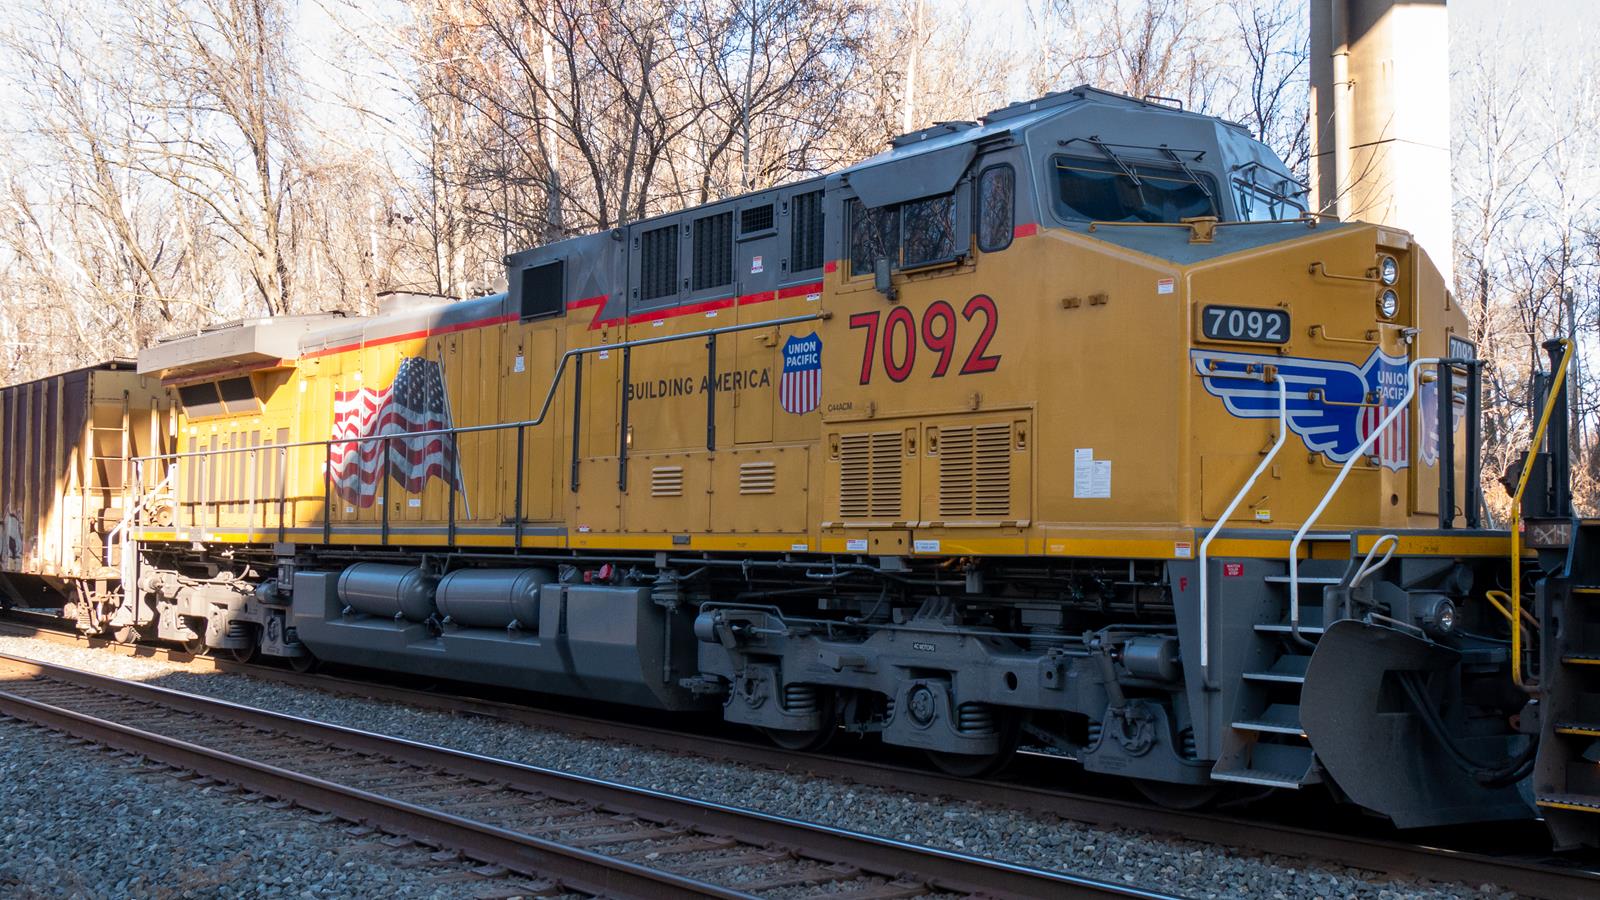 7092 is a class C44ACM and  is pictured in West Conshohocken, Pennsylvania, United States.  This was taken along the Norfolk Southern Harrisburg Line on the Union Pacific Railroad. Photo Copyright: Sean McCaughey uploaded to Railroad Gallery on 12/14/2022. This photograph of 7092 was taken on Saturday, December 10, 2022. All Rights Reserved. 